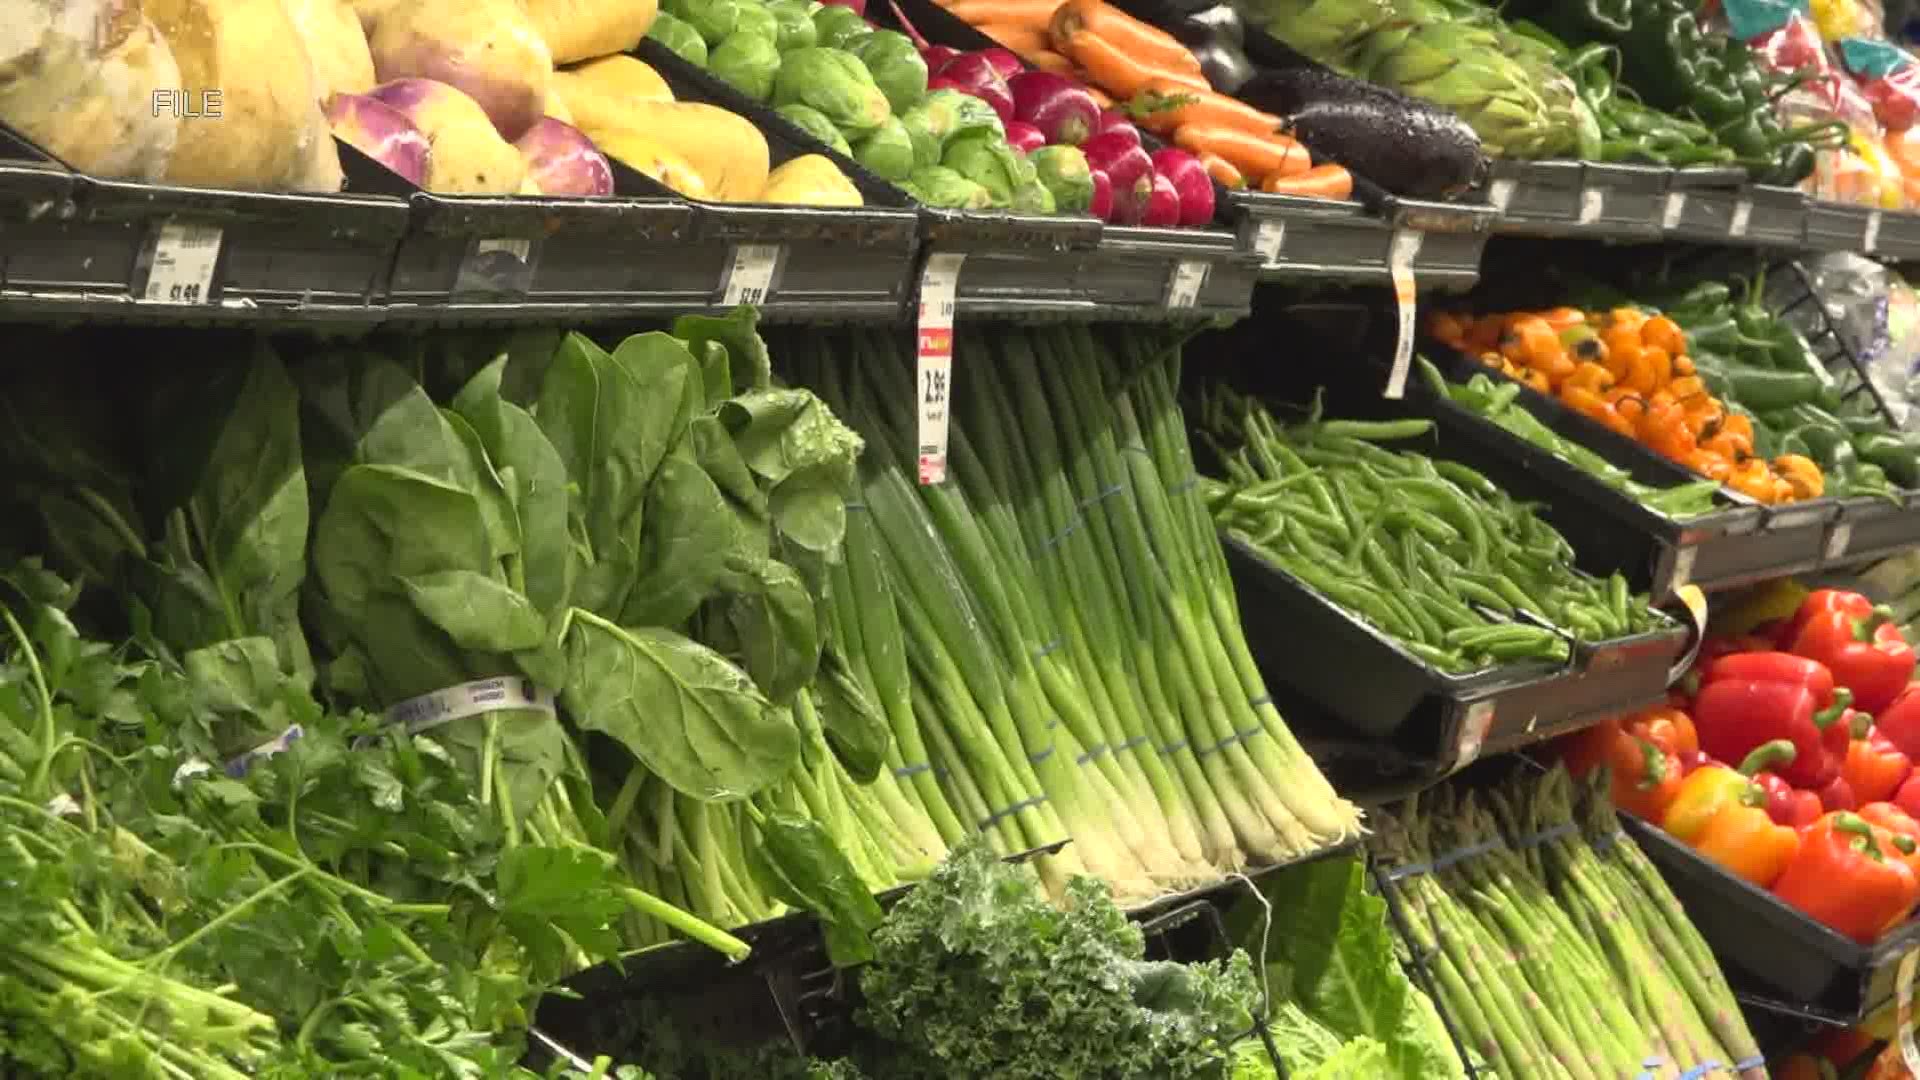 Grocery prices expected to stay high, how you can save